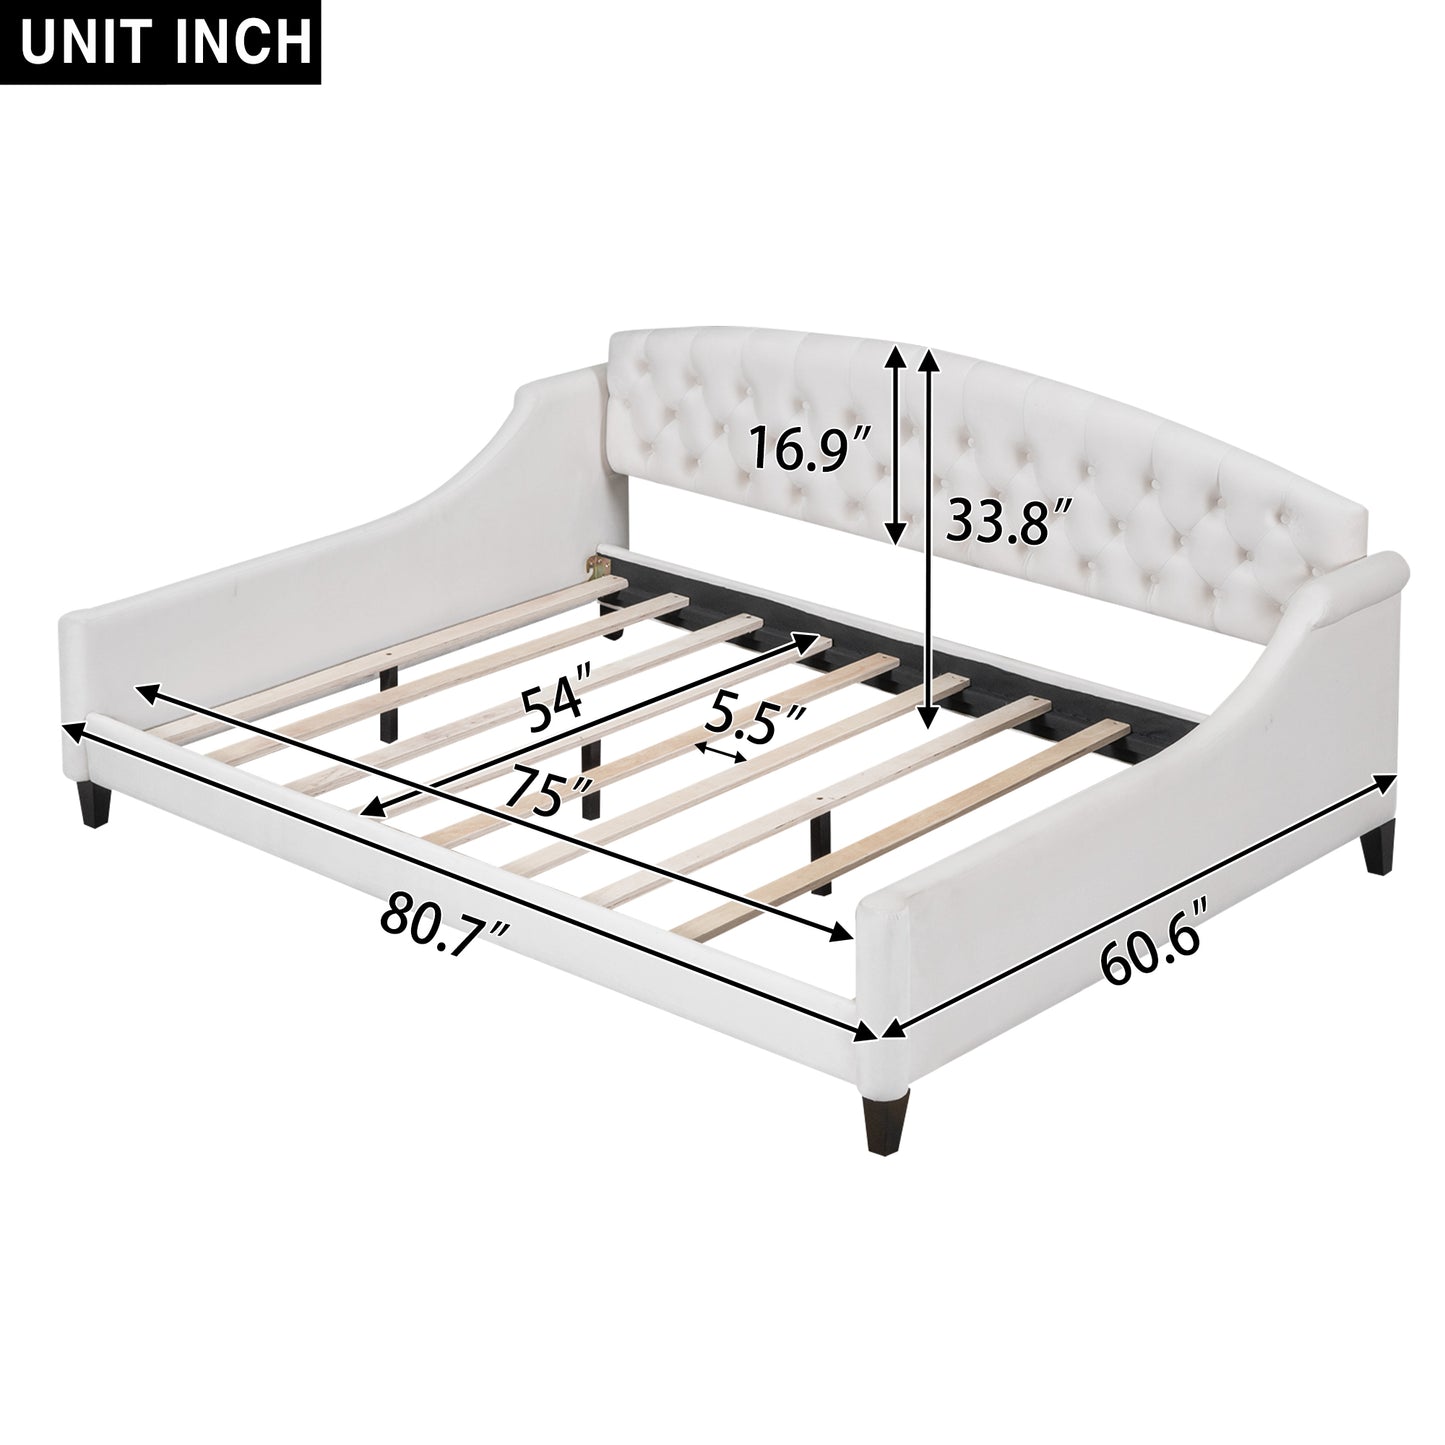 Modern Luxury Tufted Button Daybed, Full, Beige